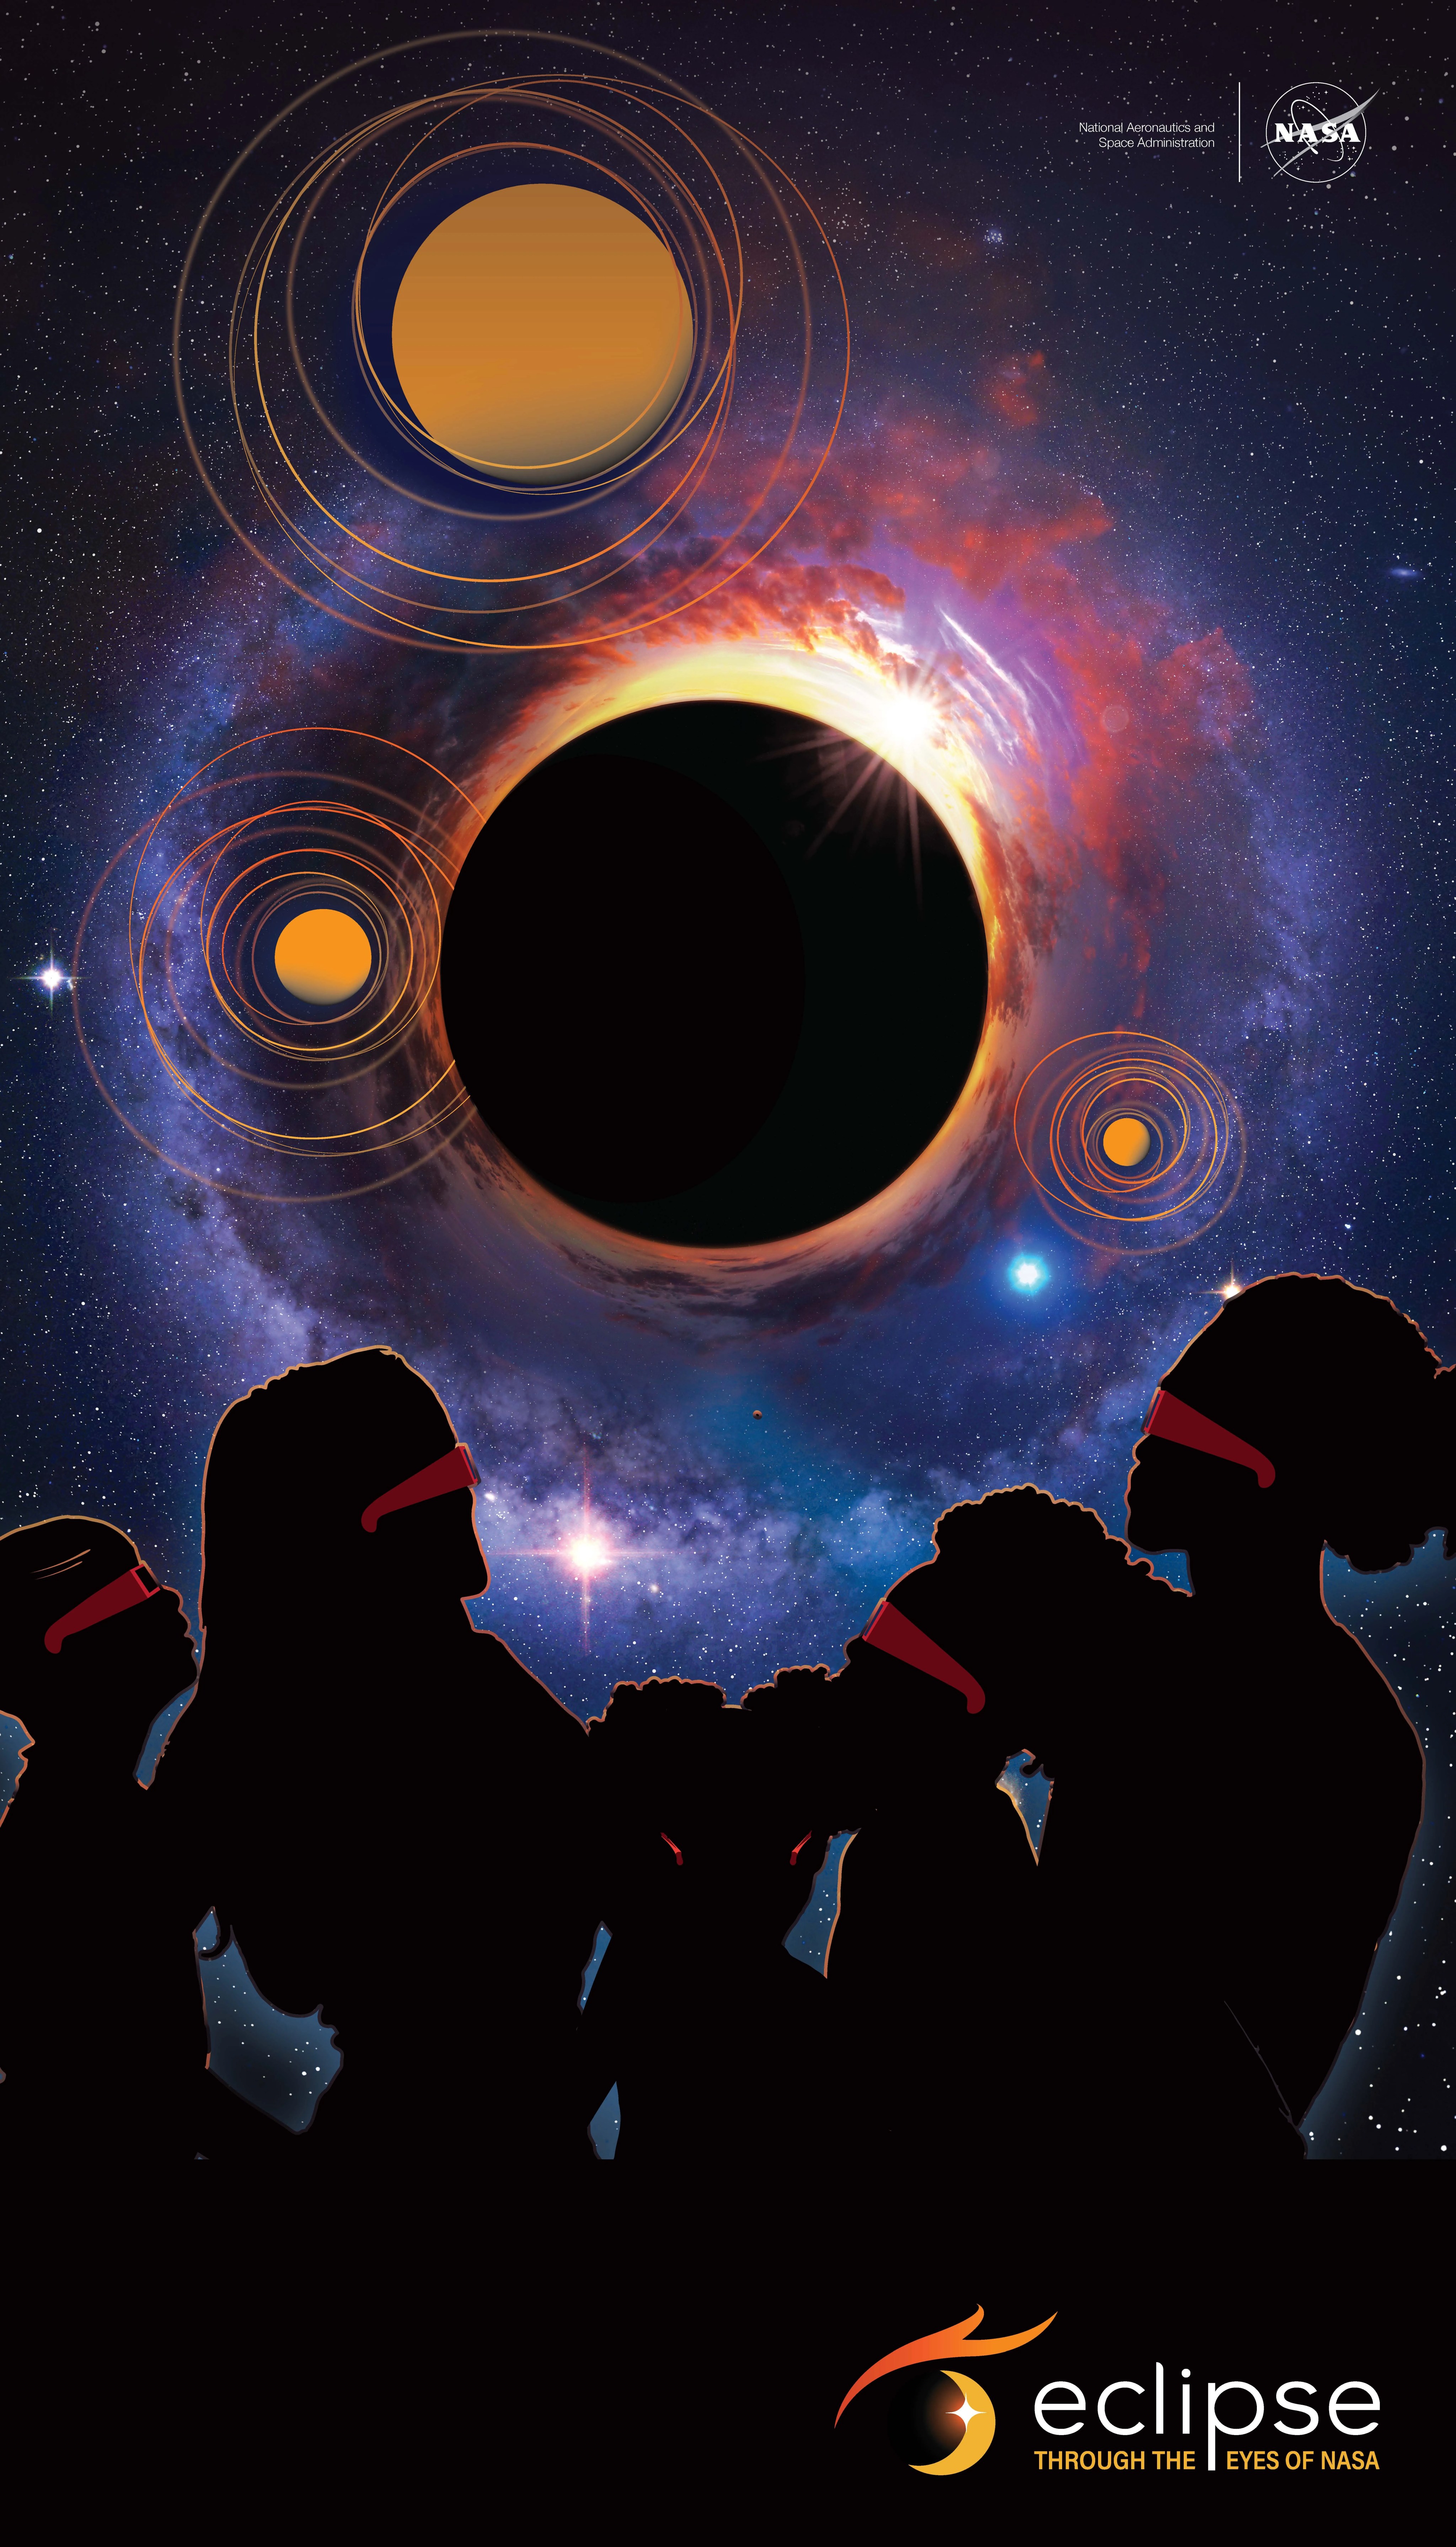 A black starry sky fills the edges of the poster. Closer toward the middle of the posters is a blue area resembling a cloudy galaxy. In the middle, a large black circle covers most of a bright yellow Sun – an eclipse. On the top right of the circle, some of the Sun peeks out. Three golden, solid circles, surrounded by thin orange circular lines are scattered around the middle eclipse. At the bottom of the poster, 5 people, varying in age, wear eclipse glasses and look up toward the eclipse.